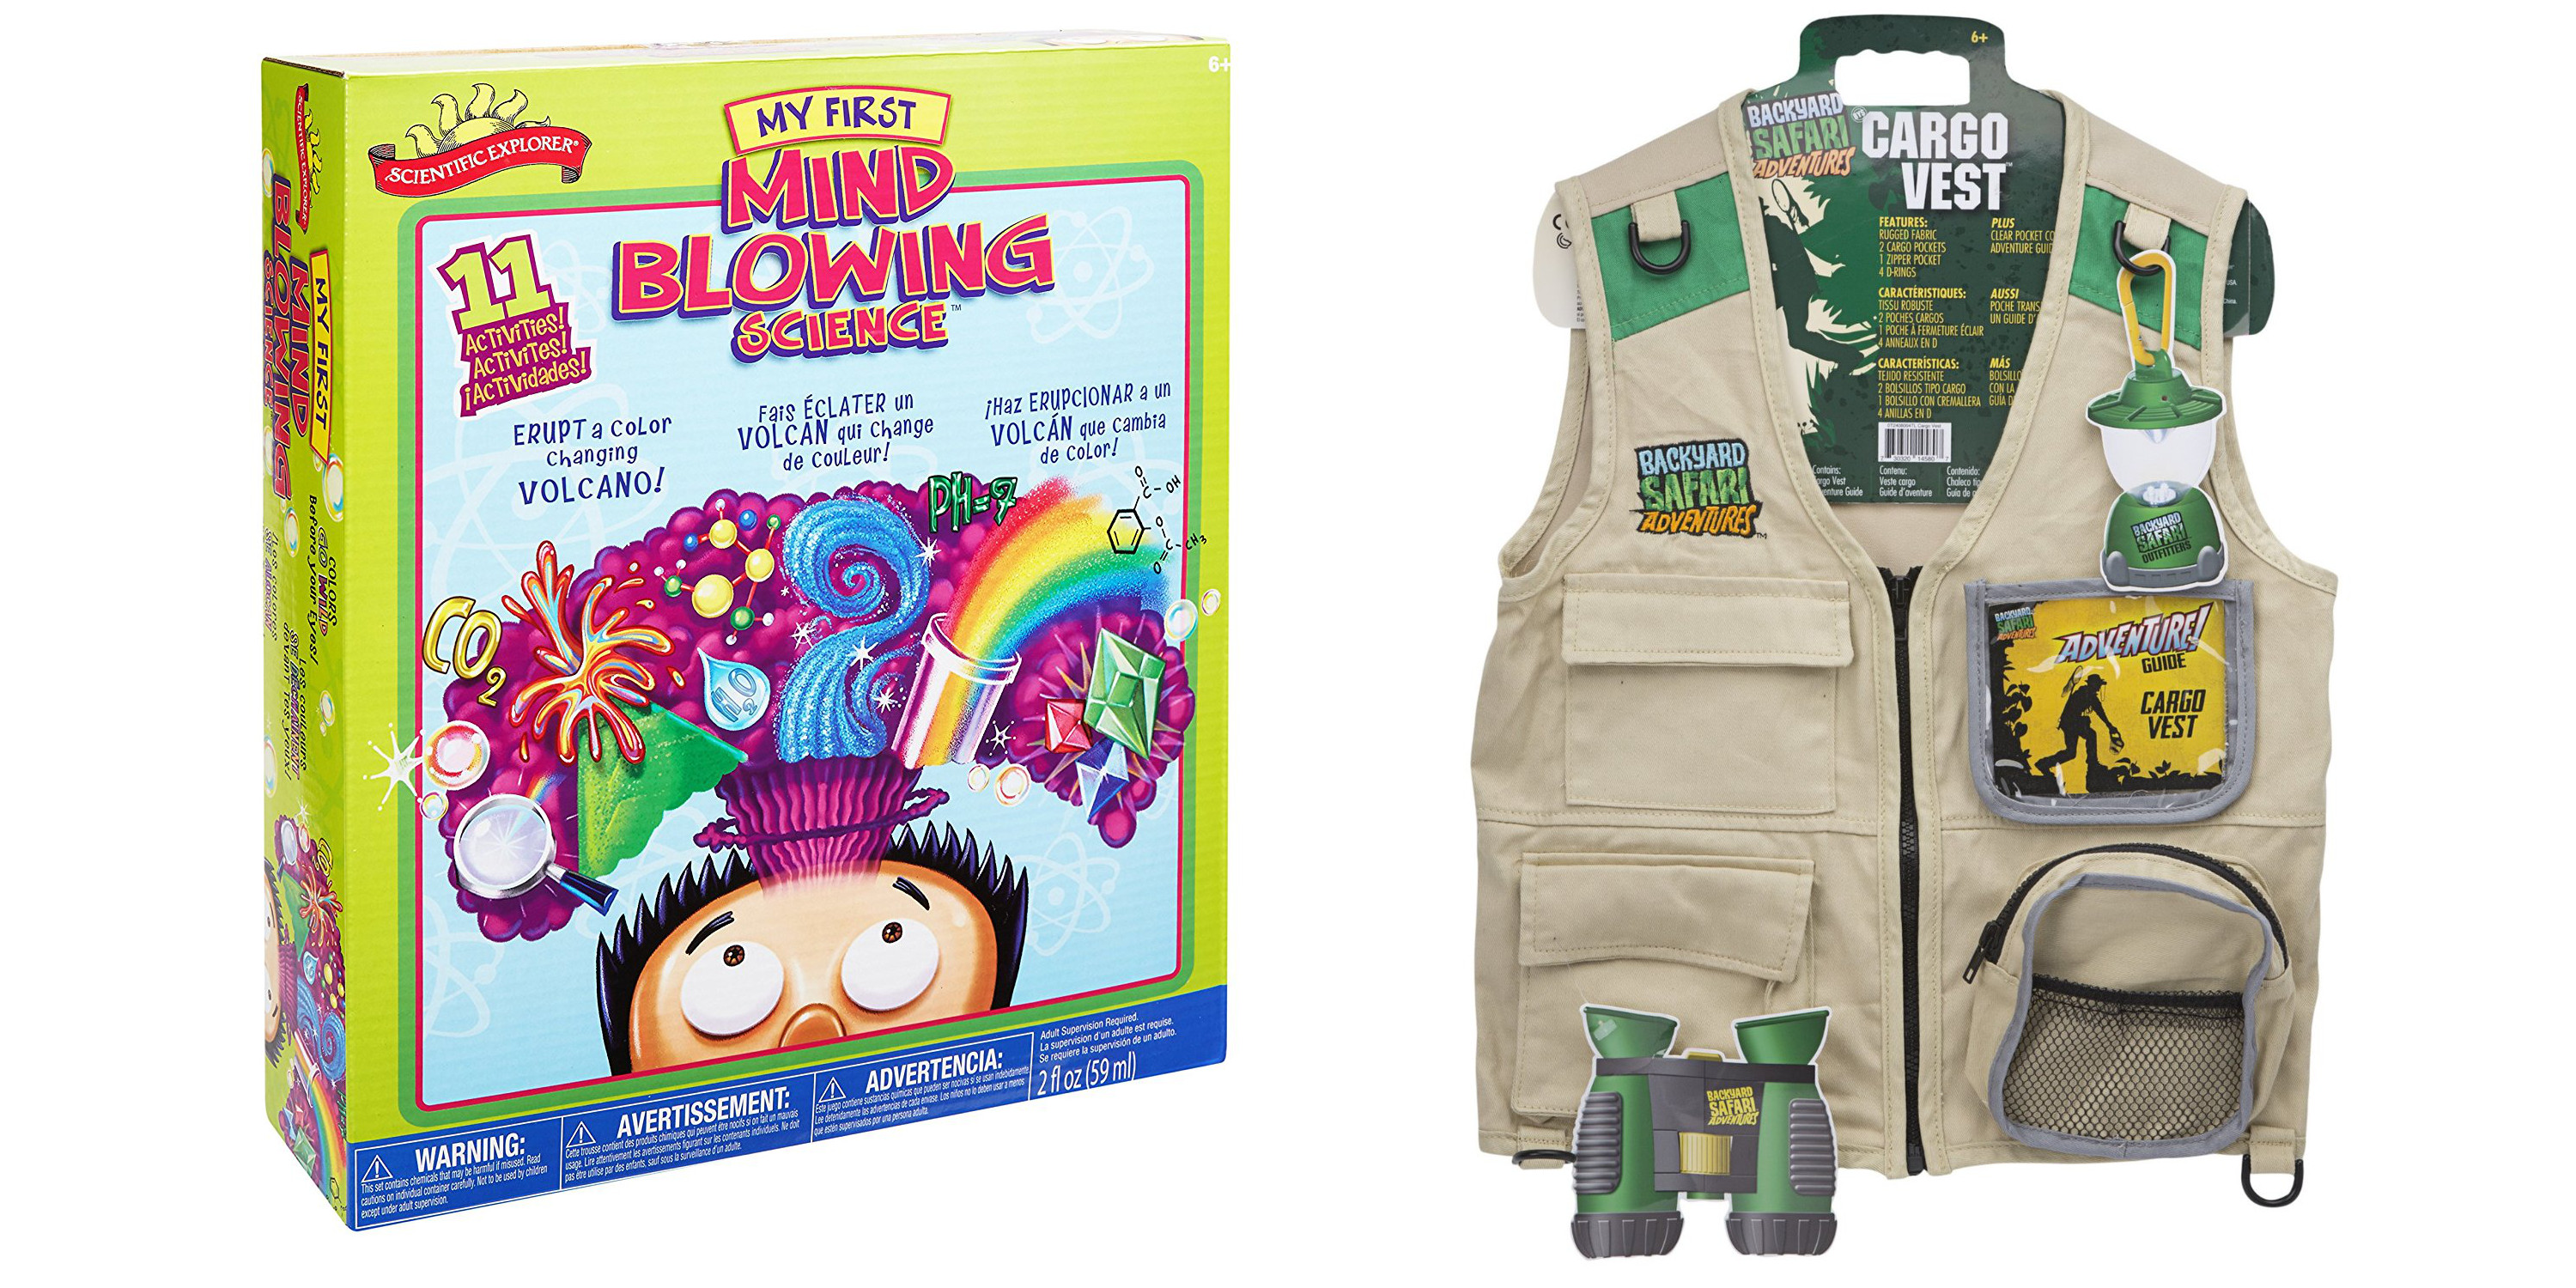 Amazon S 1 Day Alex Toys Sale Up To 50 Off Backyard Safari Cargo Vest 10 My First Science Kit 10 Much More 9to5toys